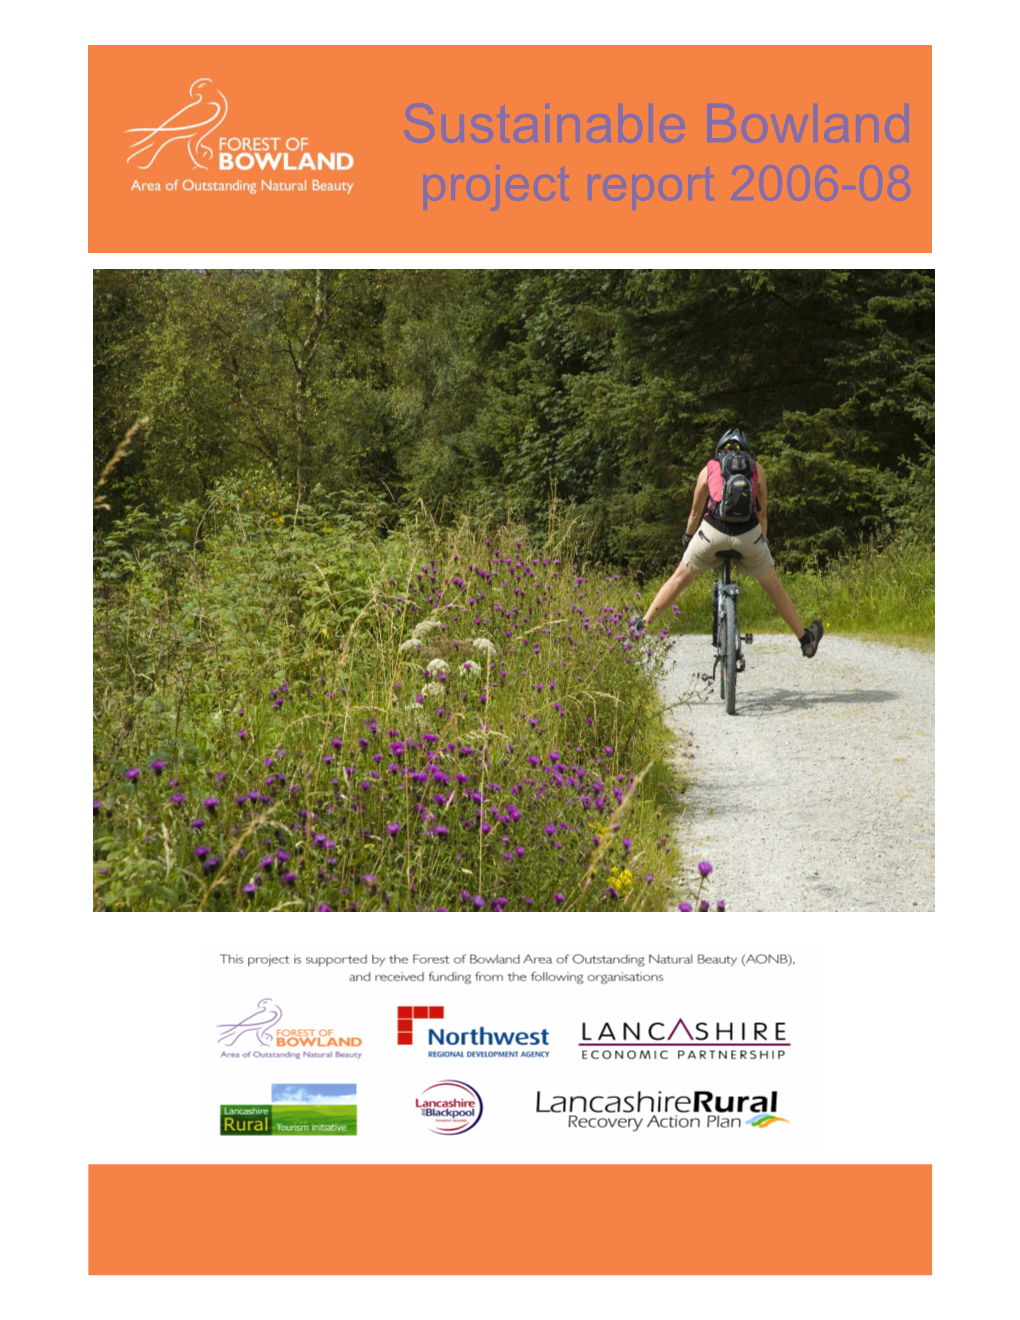 Final Report of SUSTAINABLE BOWLAND 2